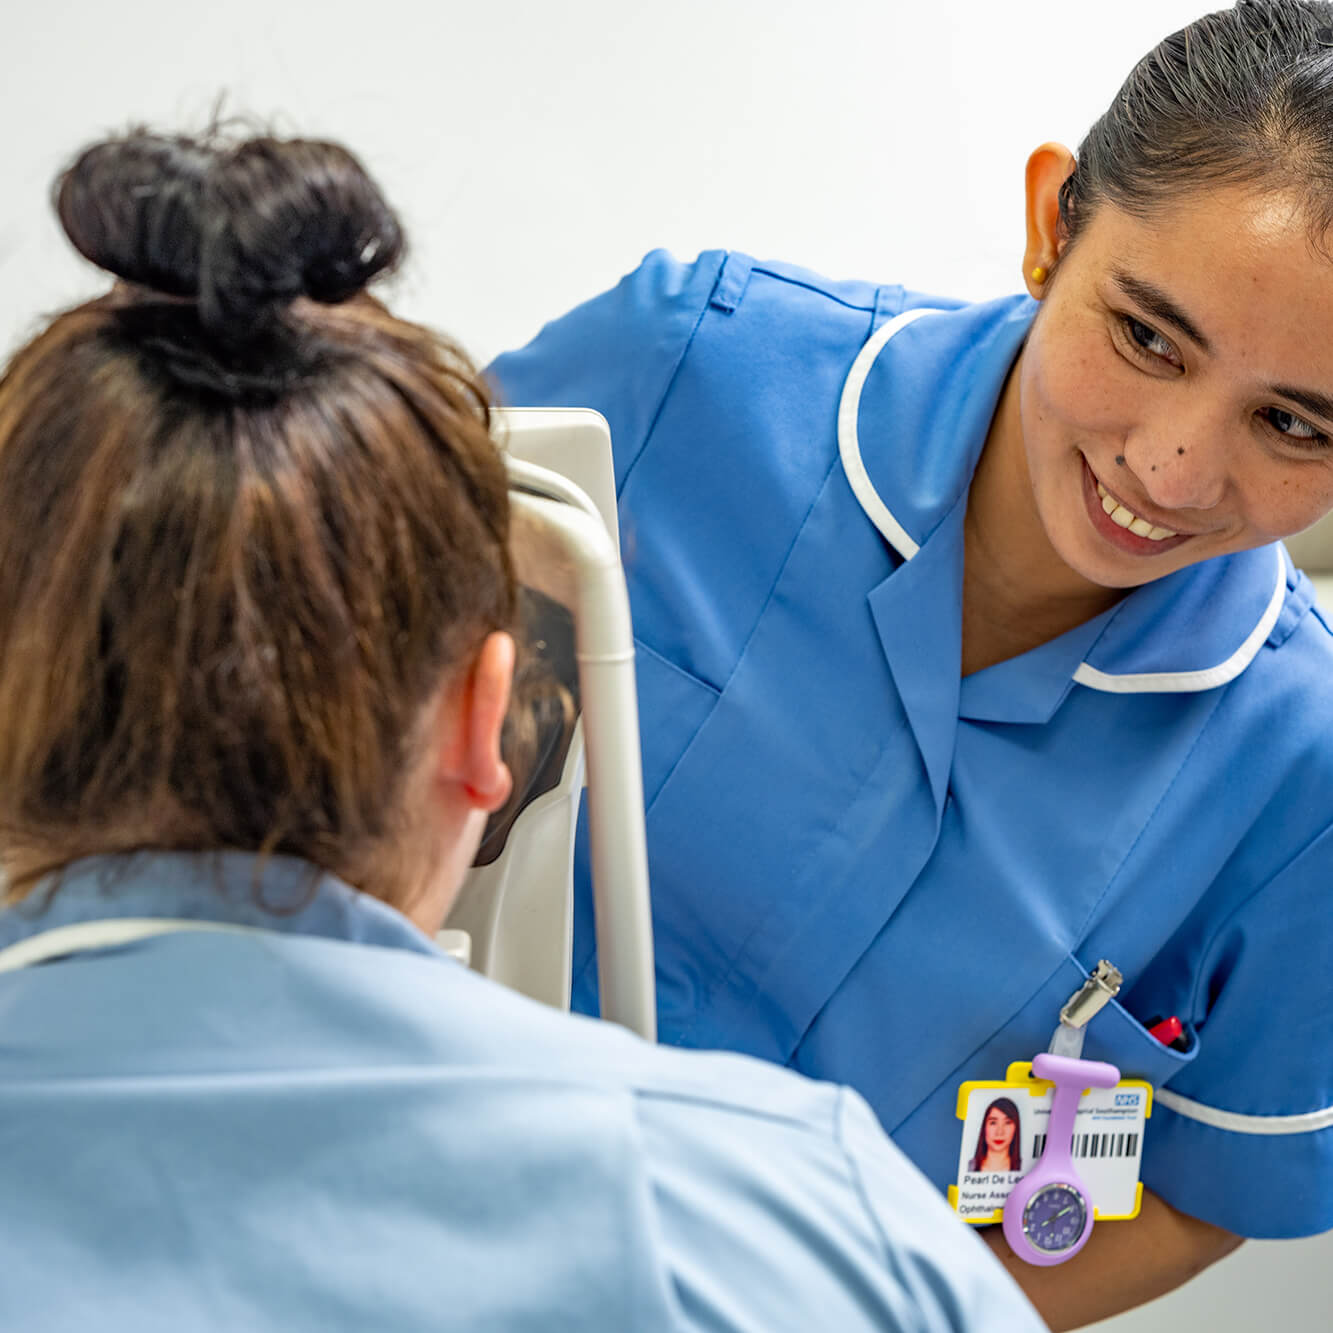 A smiling female nurse in a blue uniform assists a female patient seated in a medical chair, focusing on her care. the nurse wears an id badge.